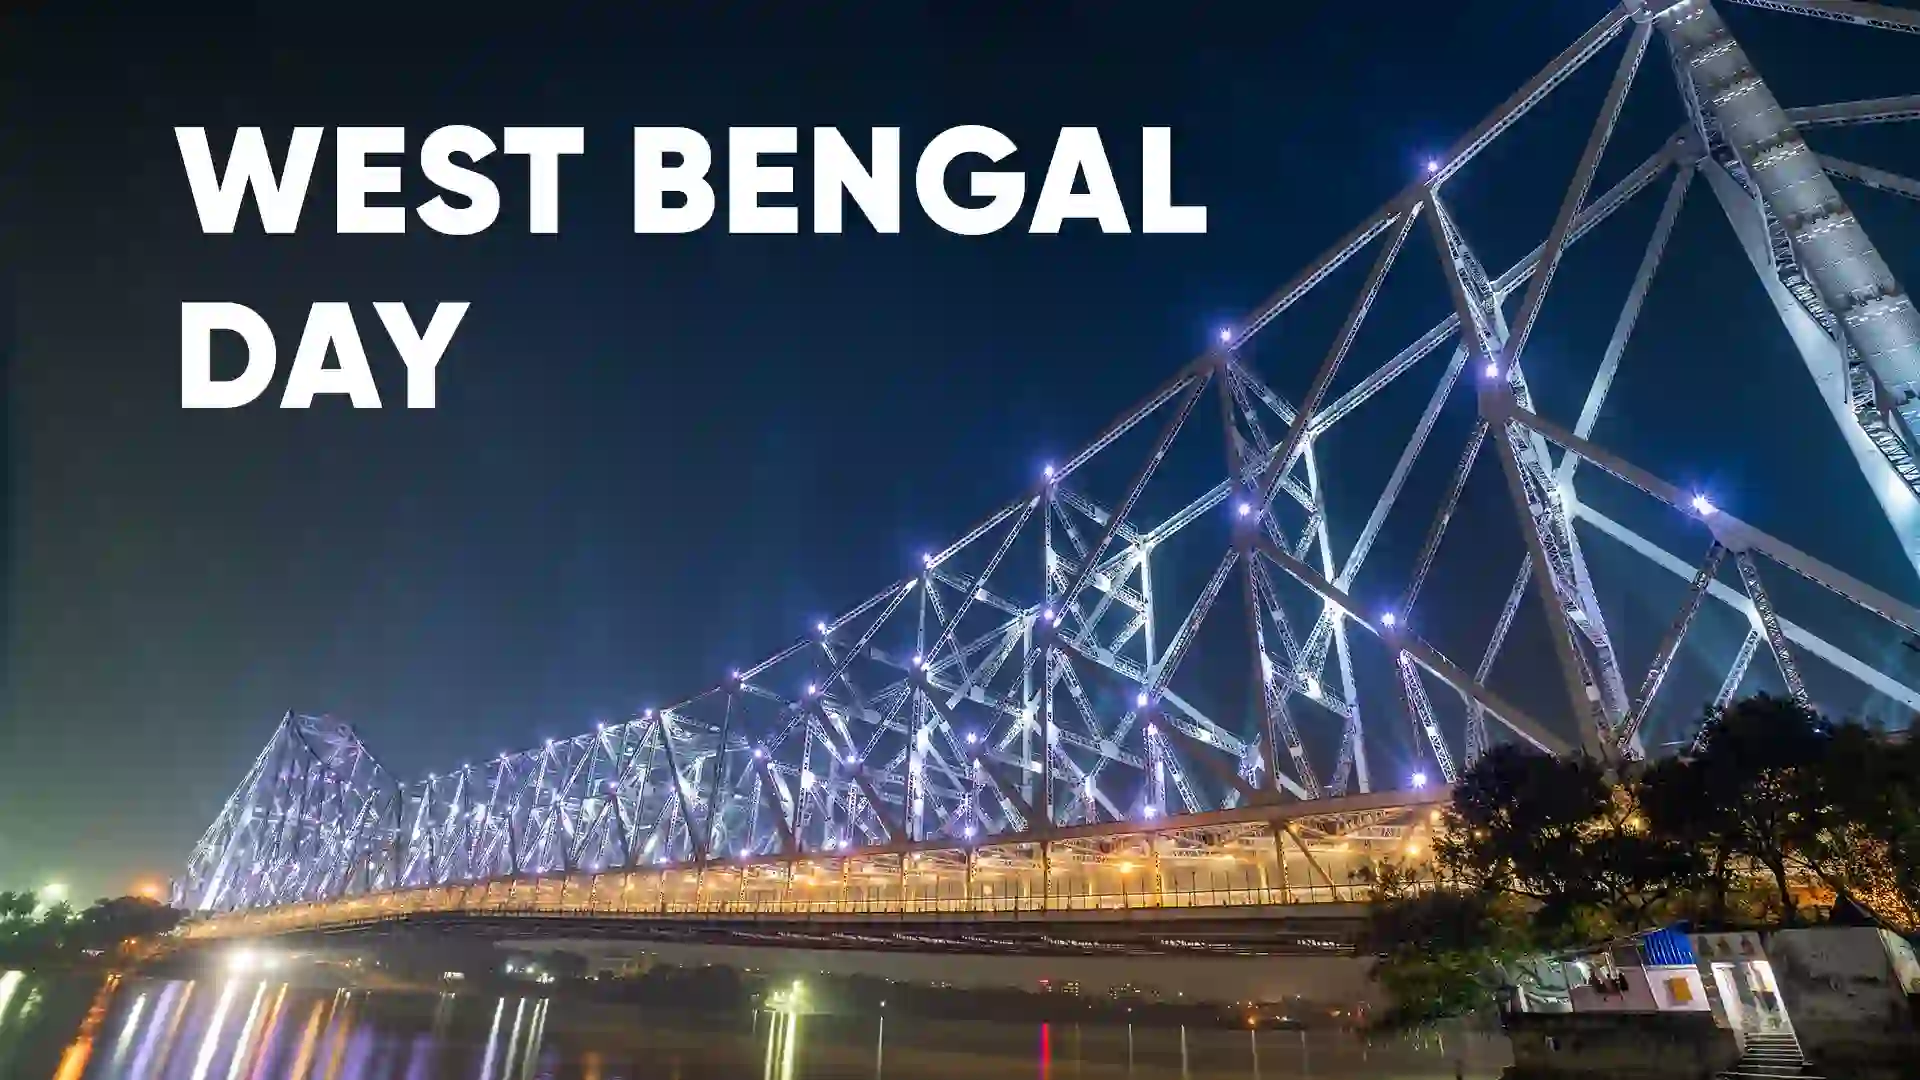 West Bengal Day This Post Design By The Revolution Deshbhakt Hindustani